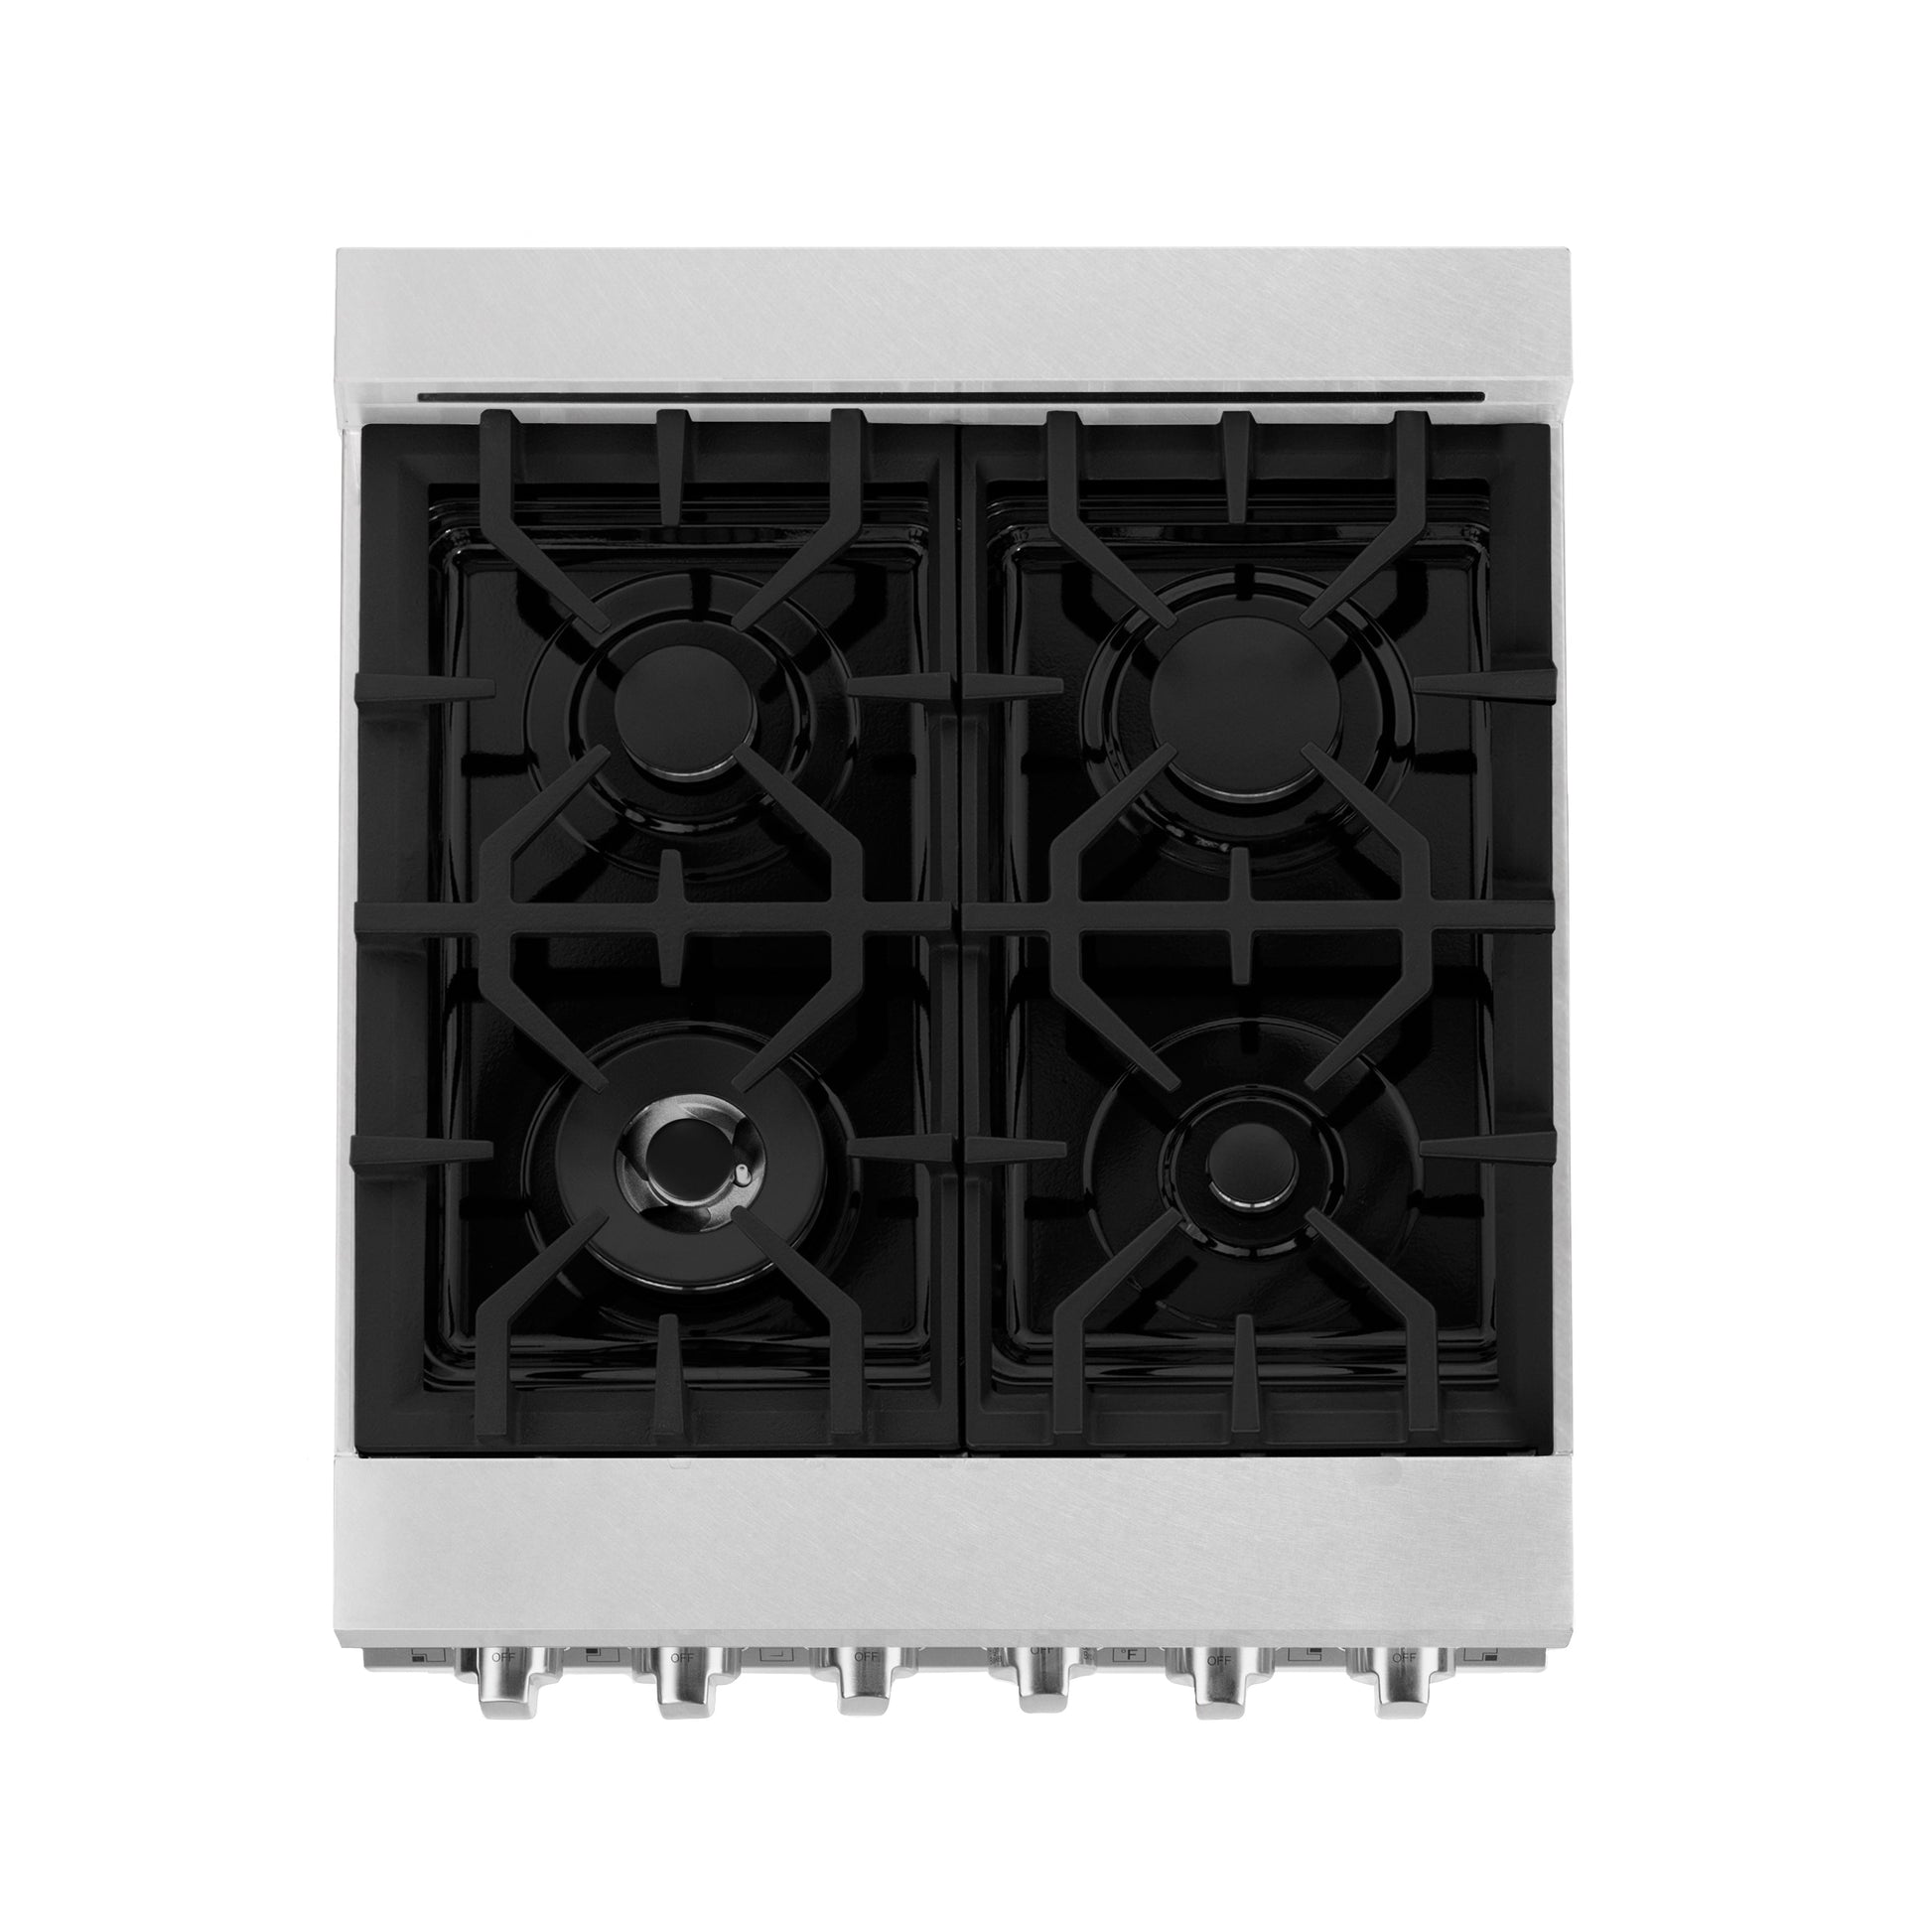 ZLINE 24" Gas Oven and Cooktop Range with Griddle - DuraSnow Stainless Steel with Matte White Door